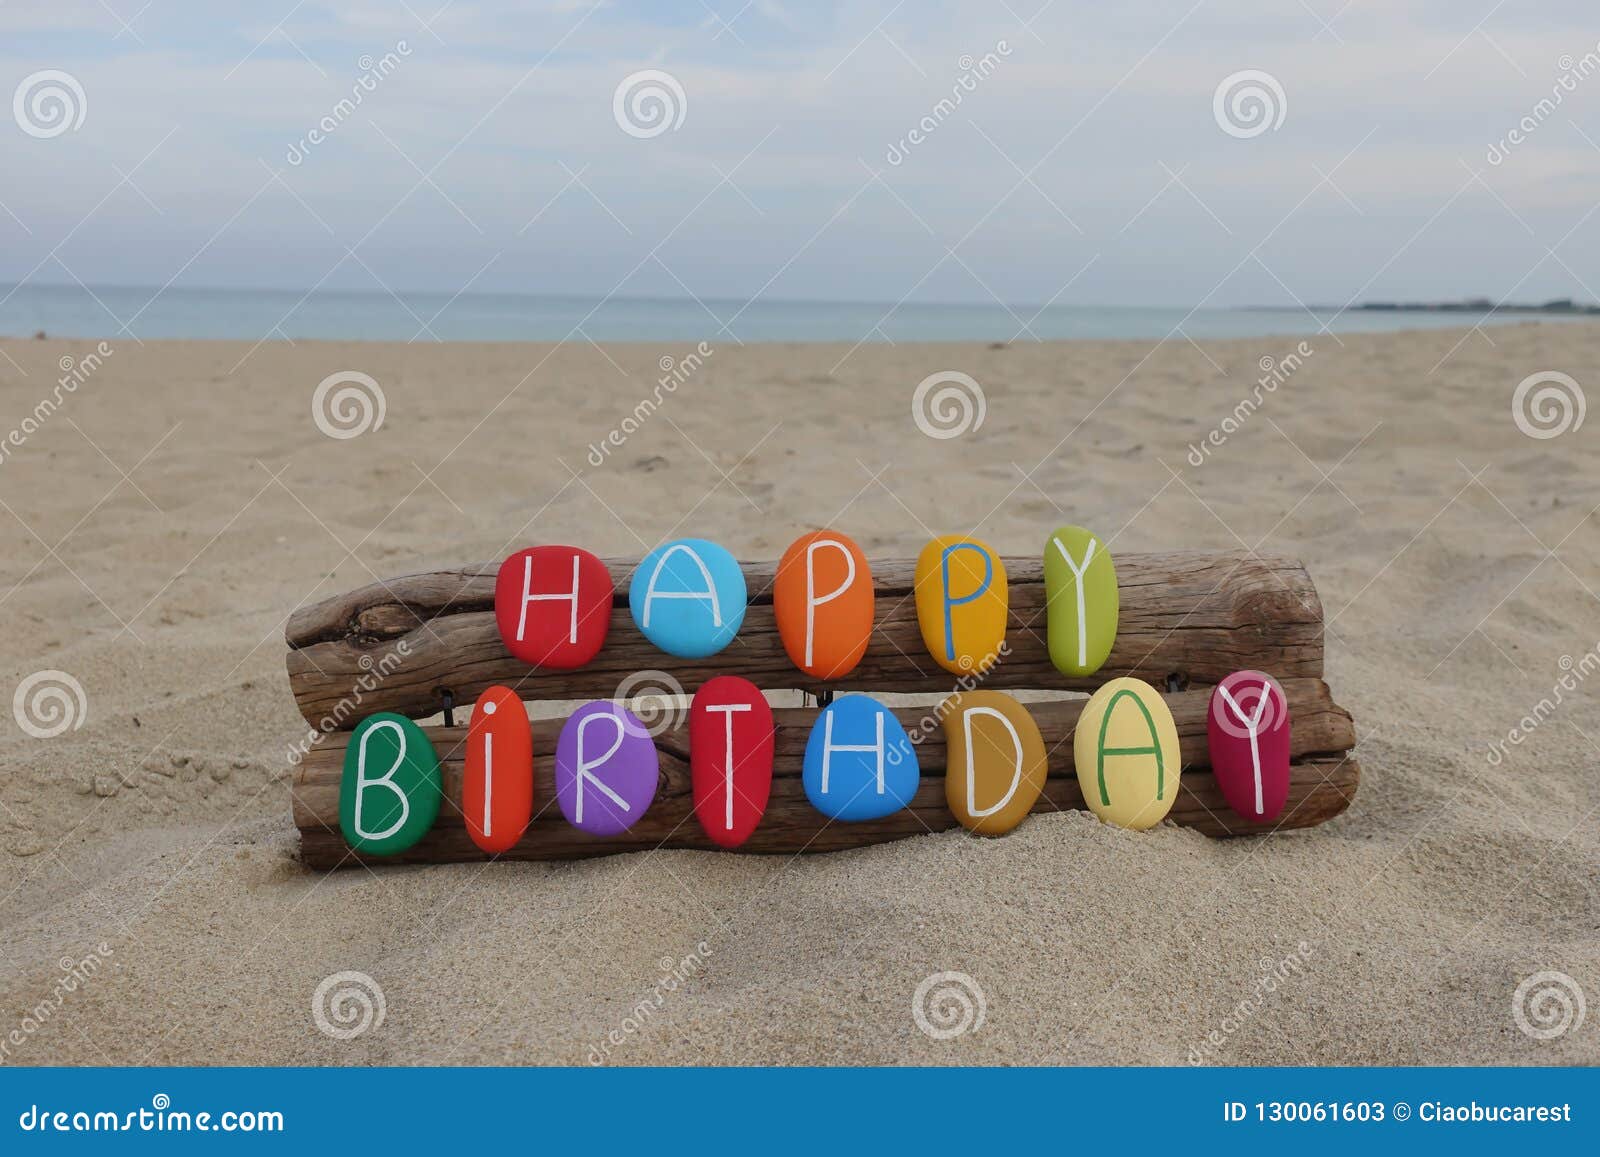 2 039 Happy Birthday Beach Background Photos Free Royalty Free Stock Photos From Dreamstime